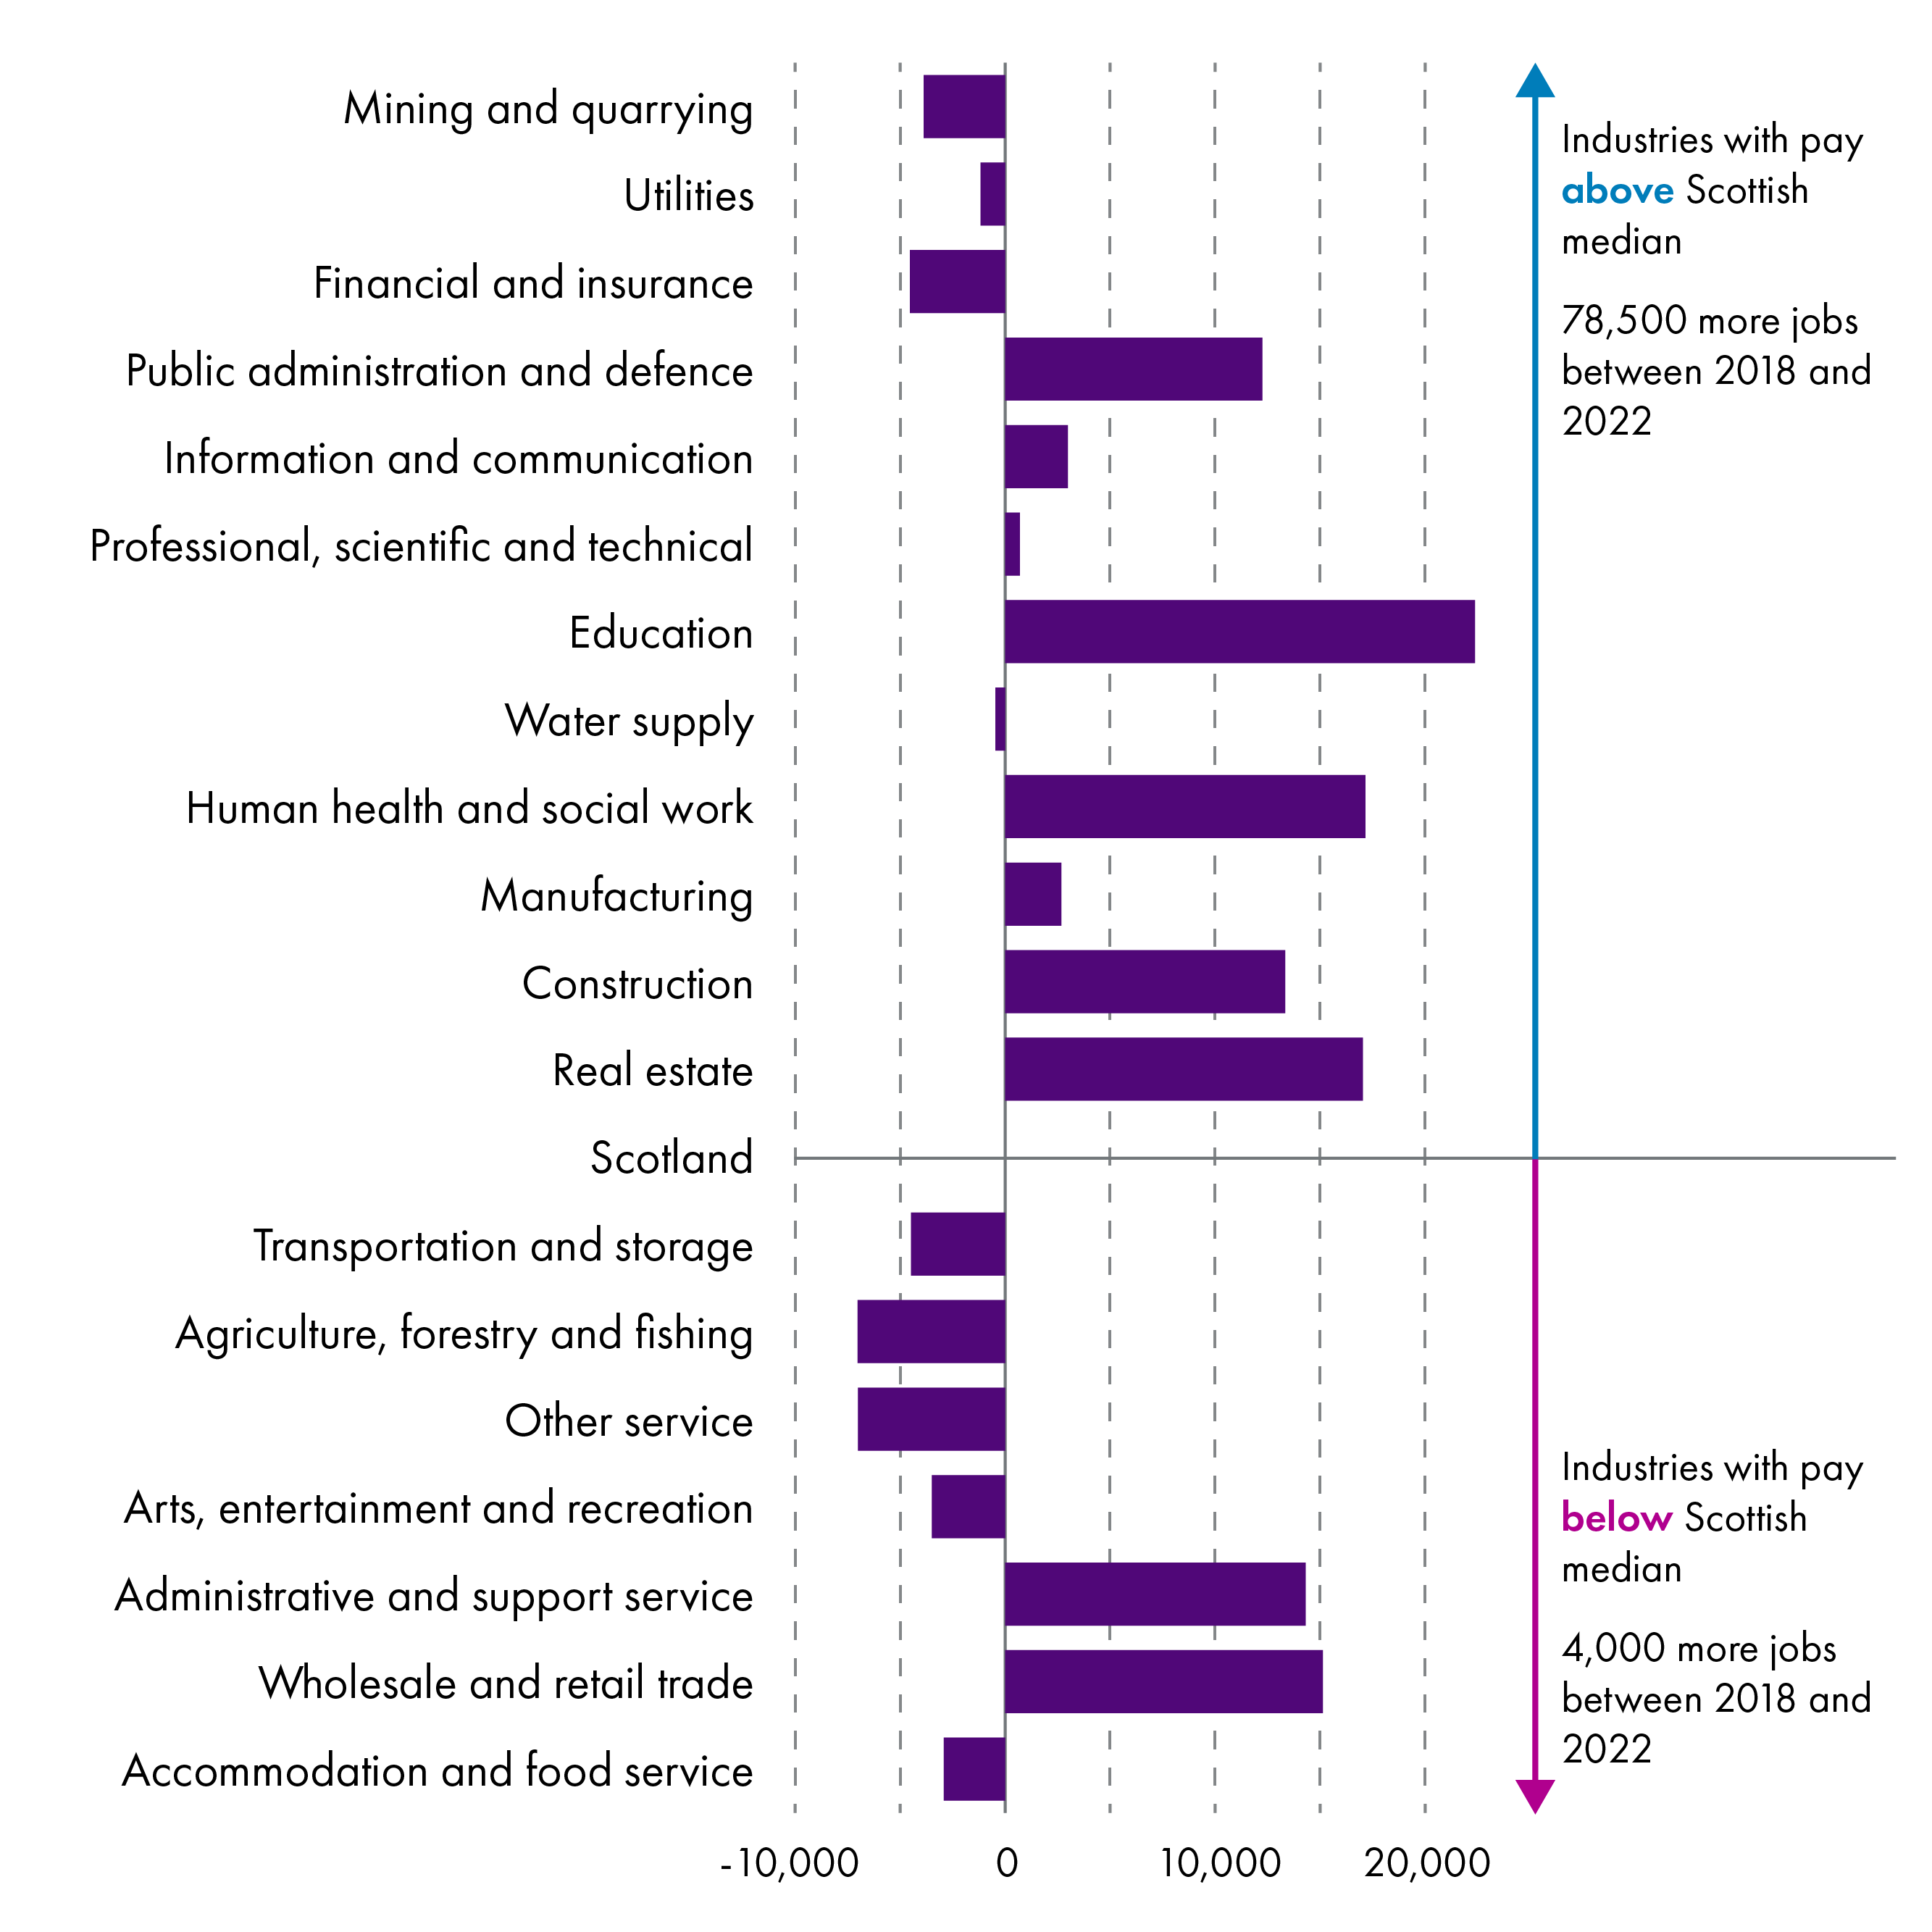 A horizontal bar chart show the change in the number of job by industry between 2018 and 2022.